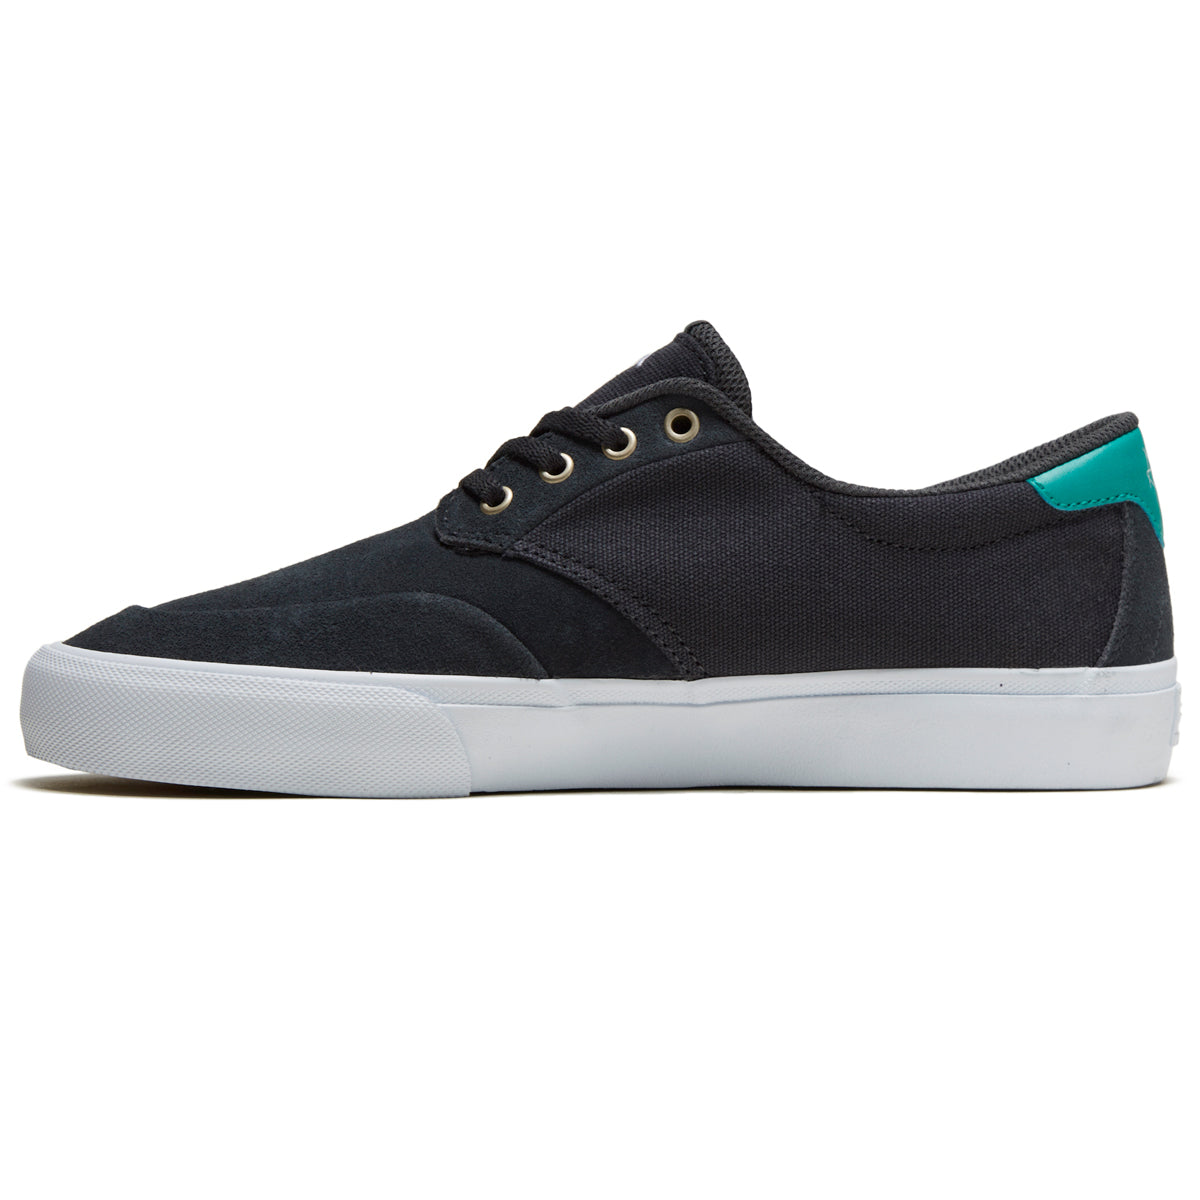 Lakai Riley 3 Shoes - Charcoal Suede image 2